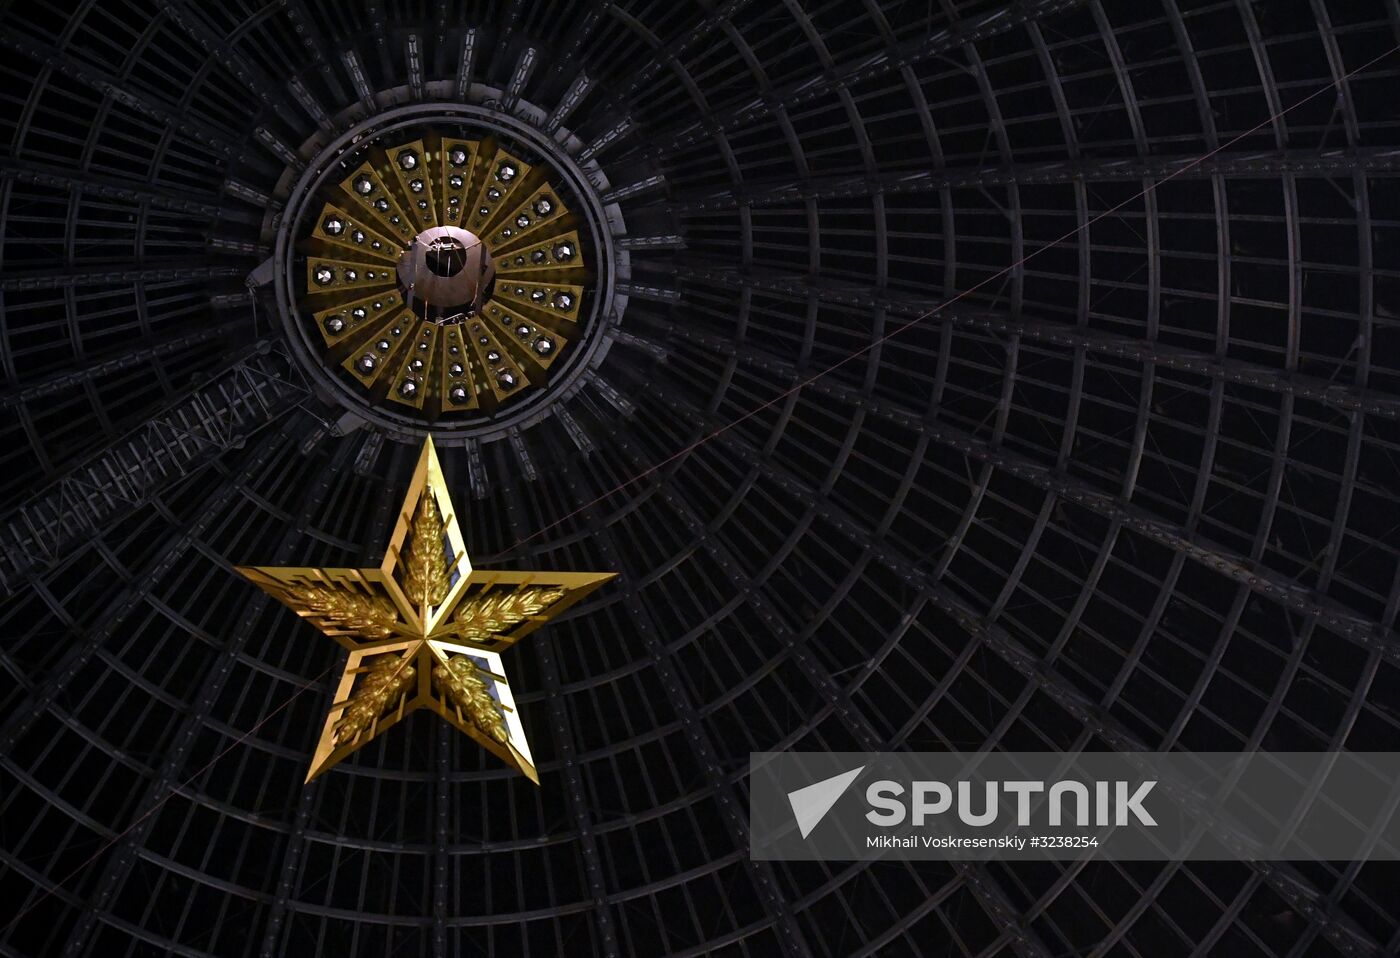 Installing star-shaped chandelier in Cosmos pavilion at VDNKh